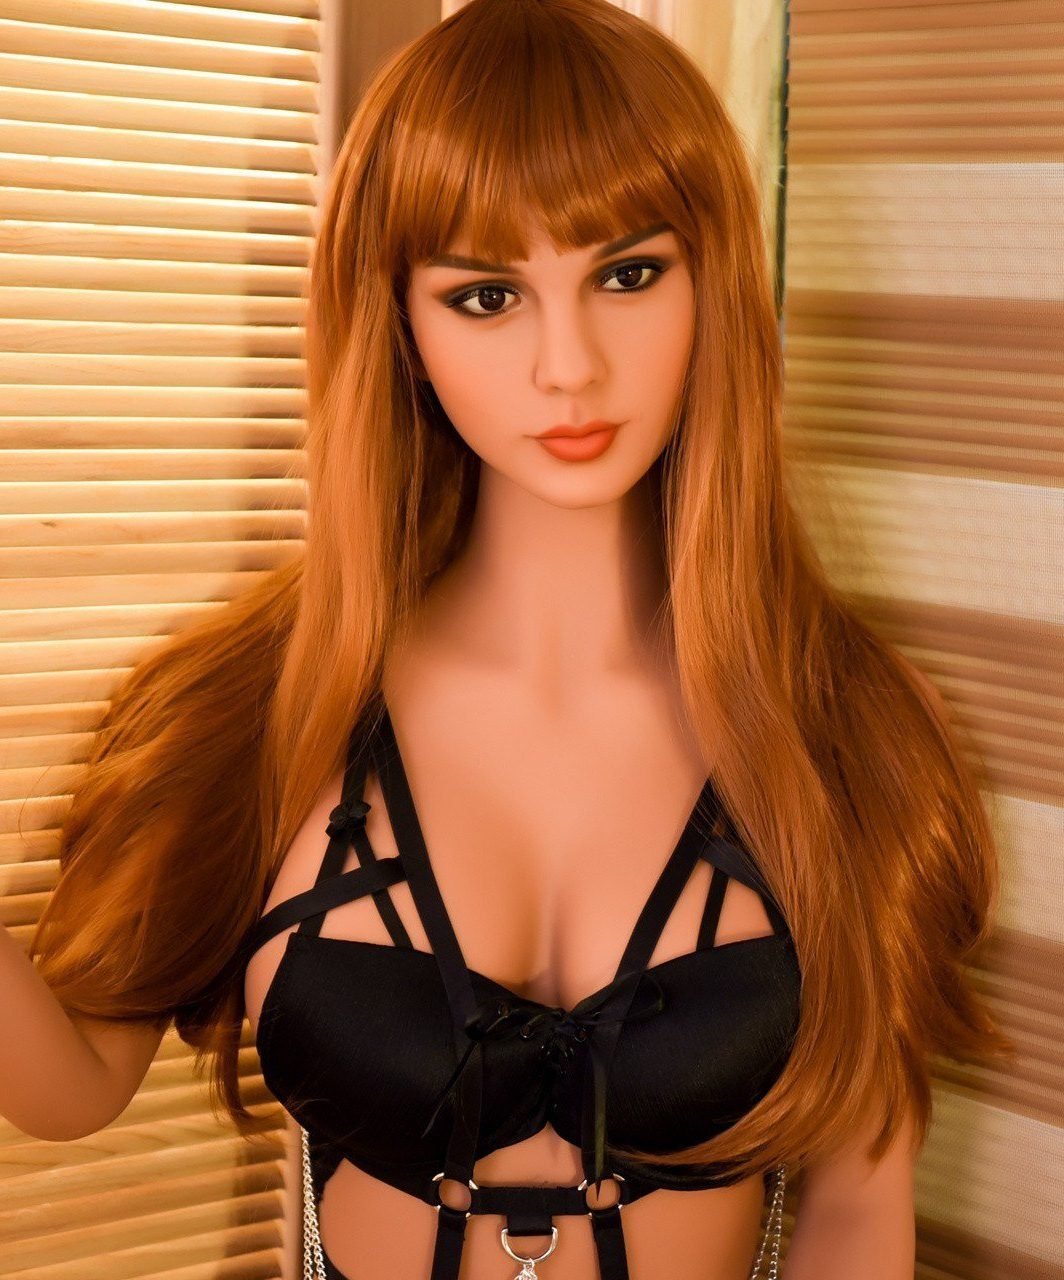 Real Size Discount Sex Doll - Jane